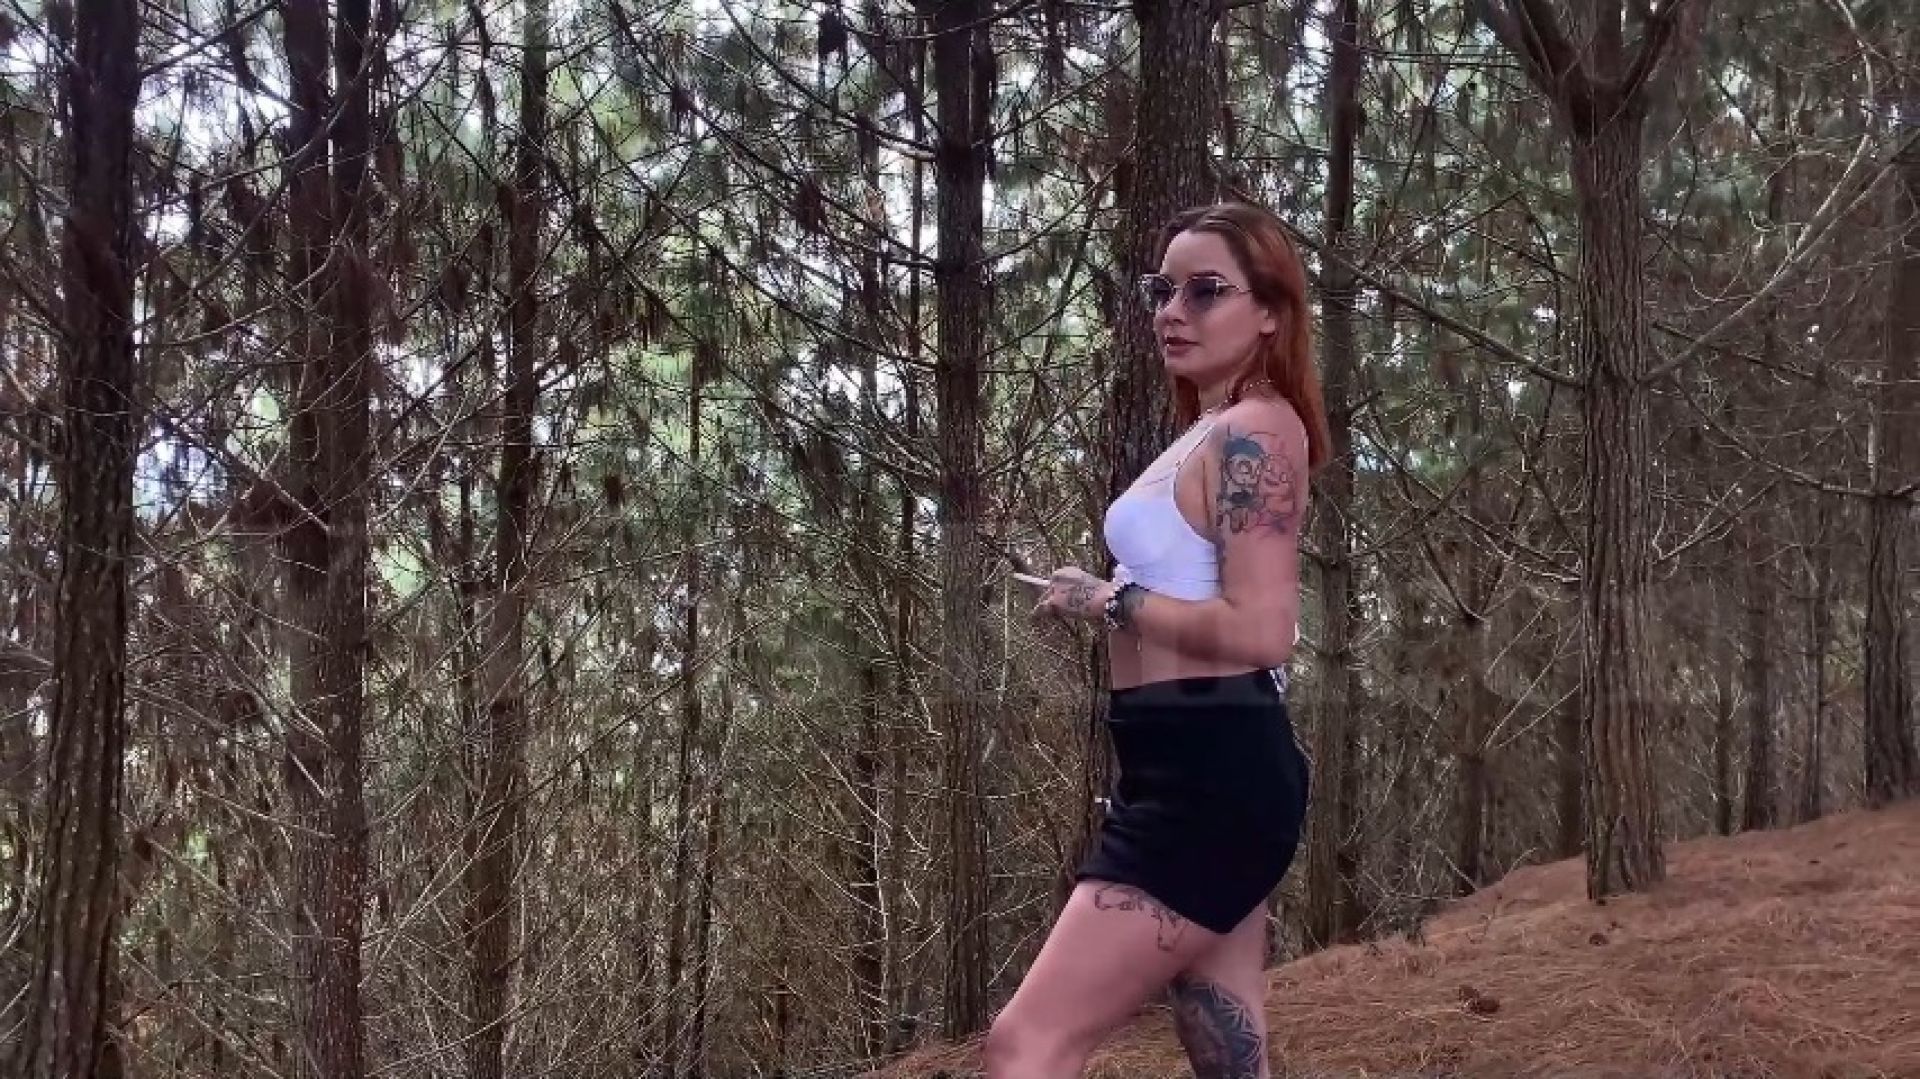 SMOKING  IN THE FOREST HALF-NAKED